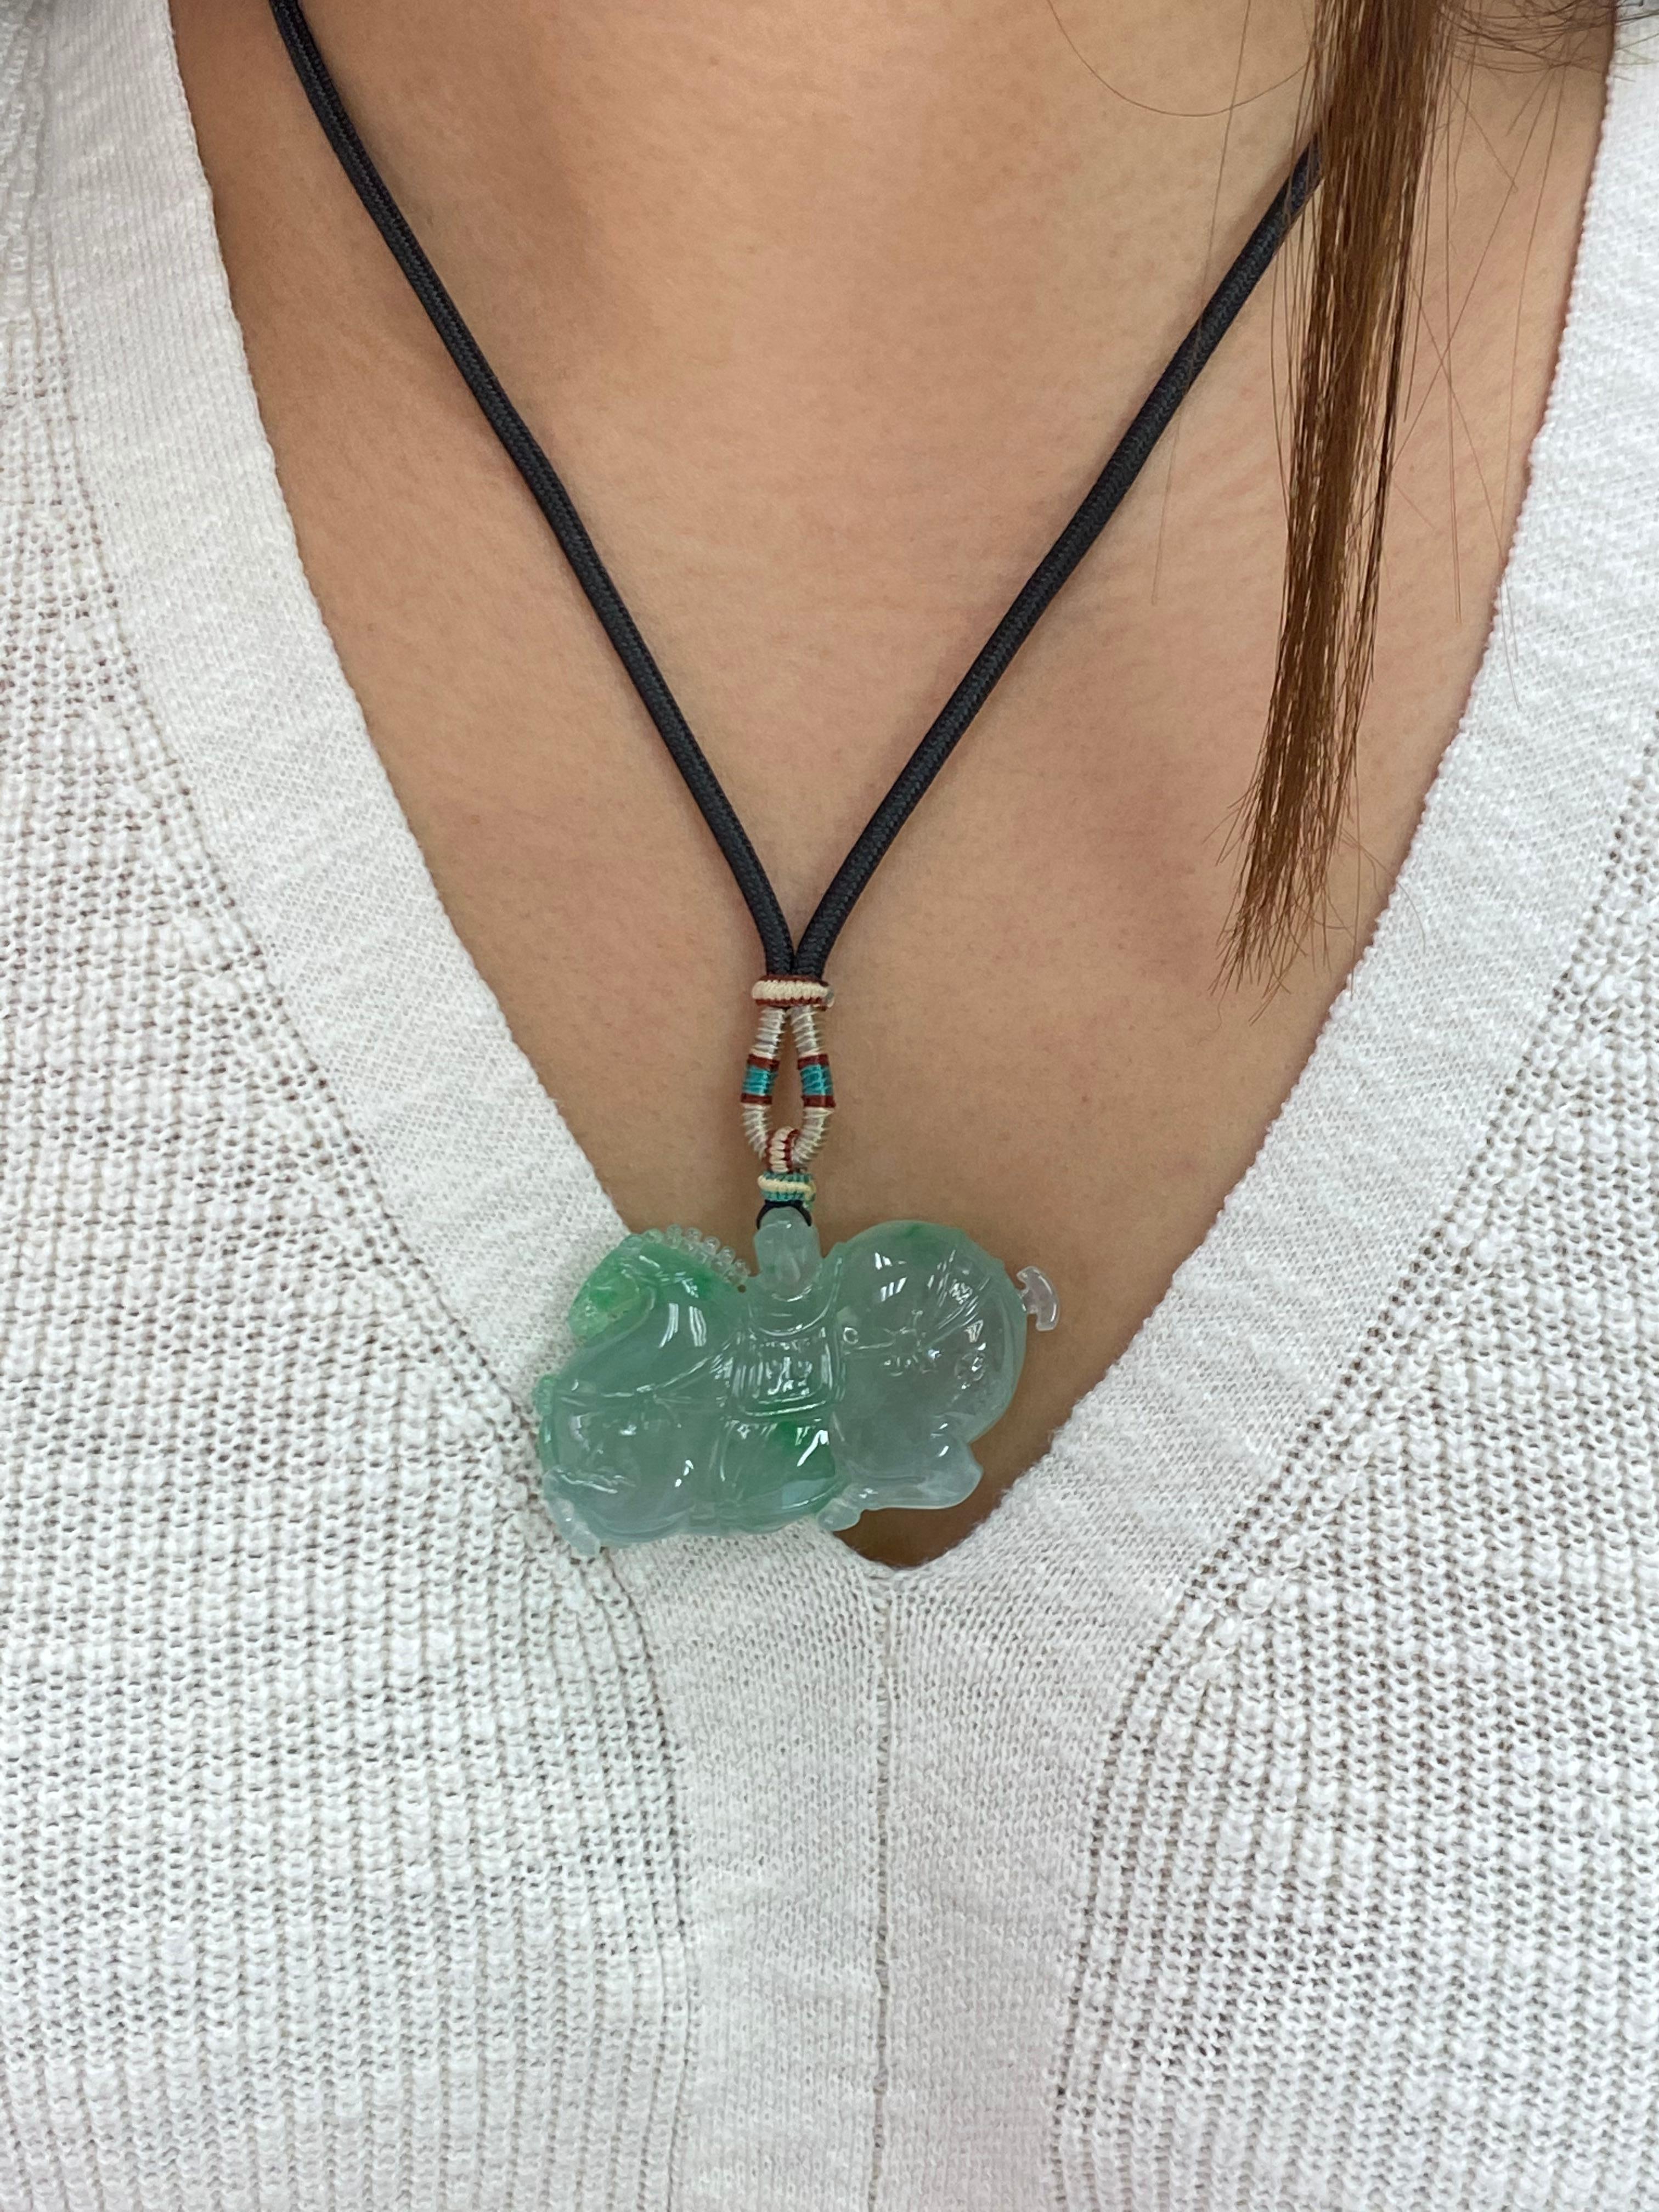 Here is a natural icy Jade jadeite pendant. The jade is certified by 2 labs. The lucky horse pendant has a gold nugget (olden days currency) on top of the horse. If you say the sentence 